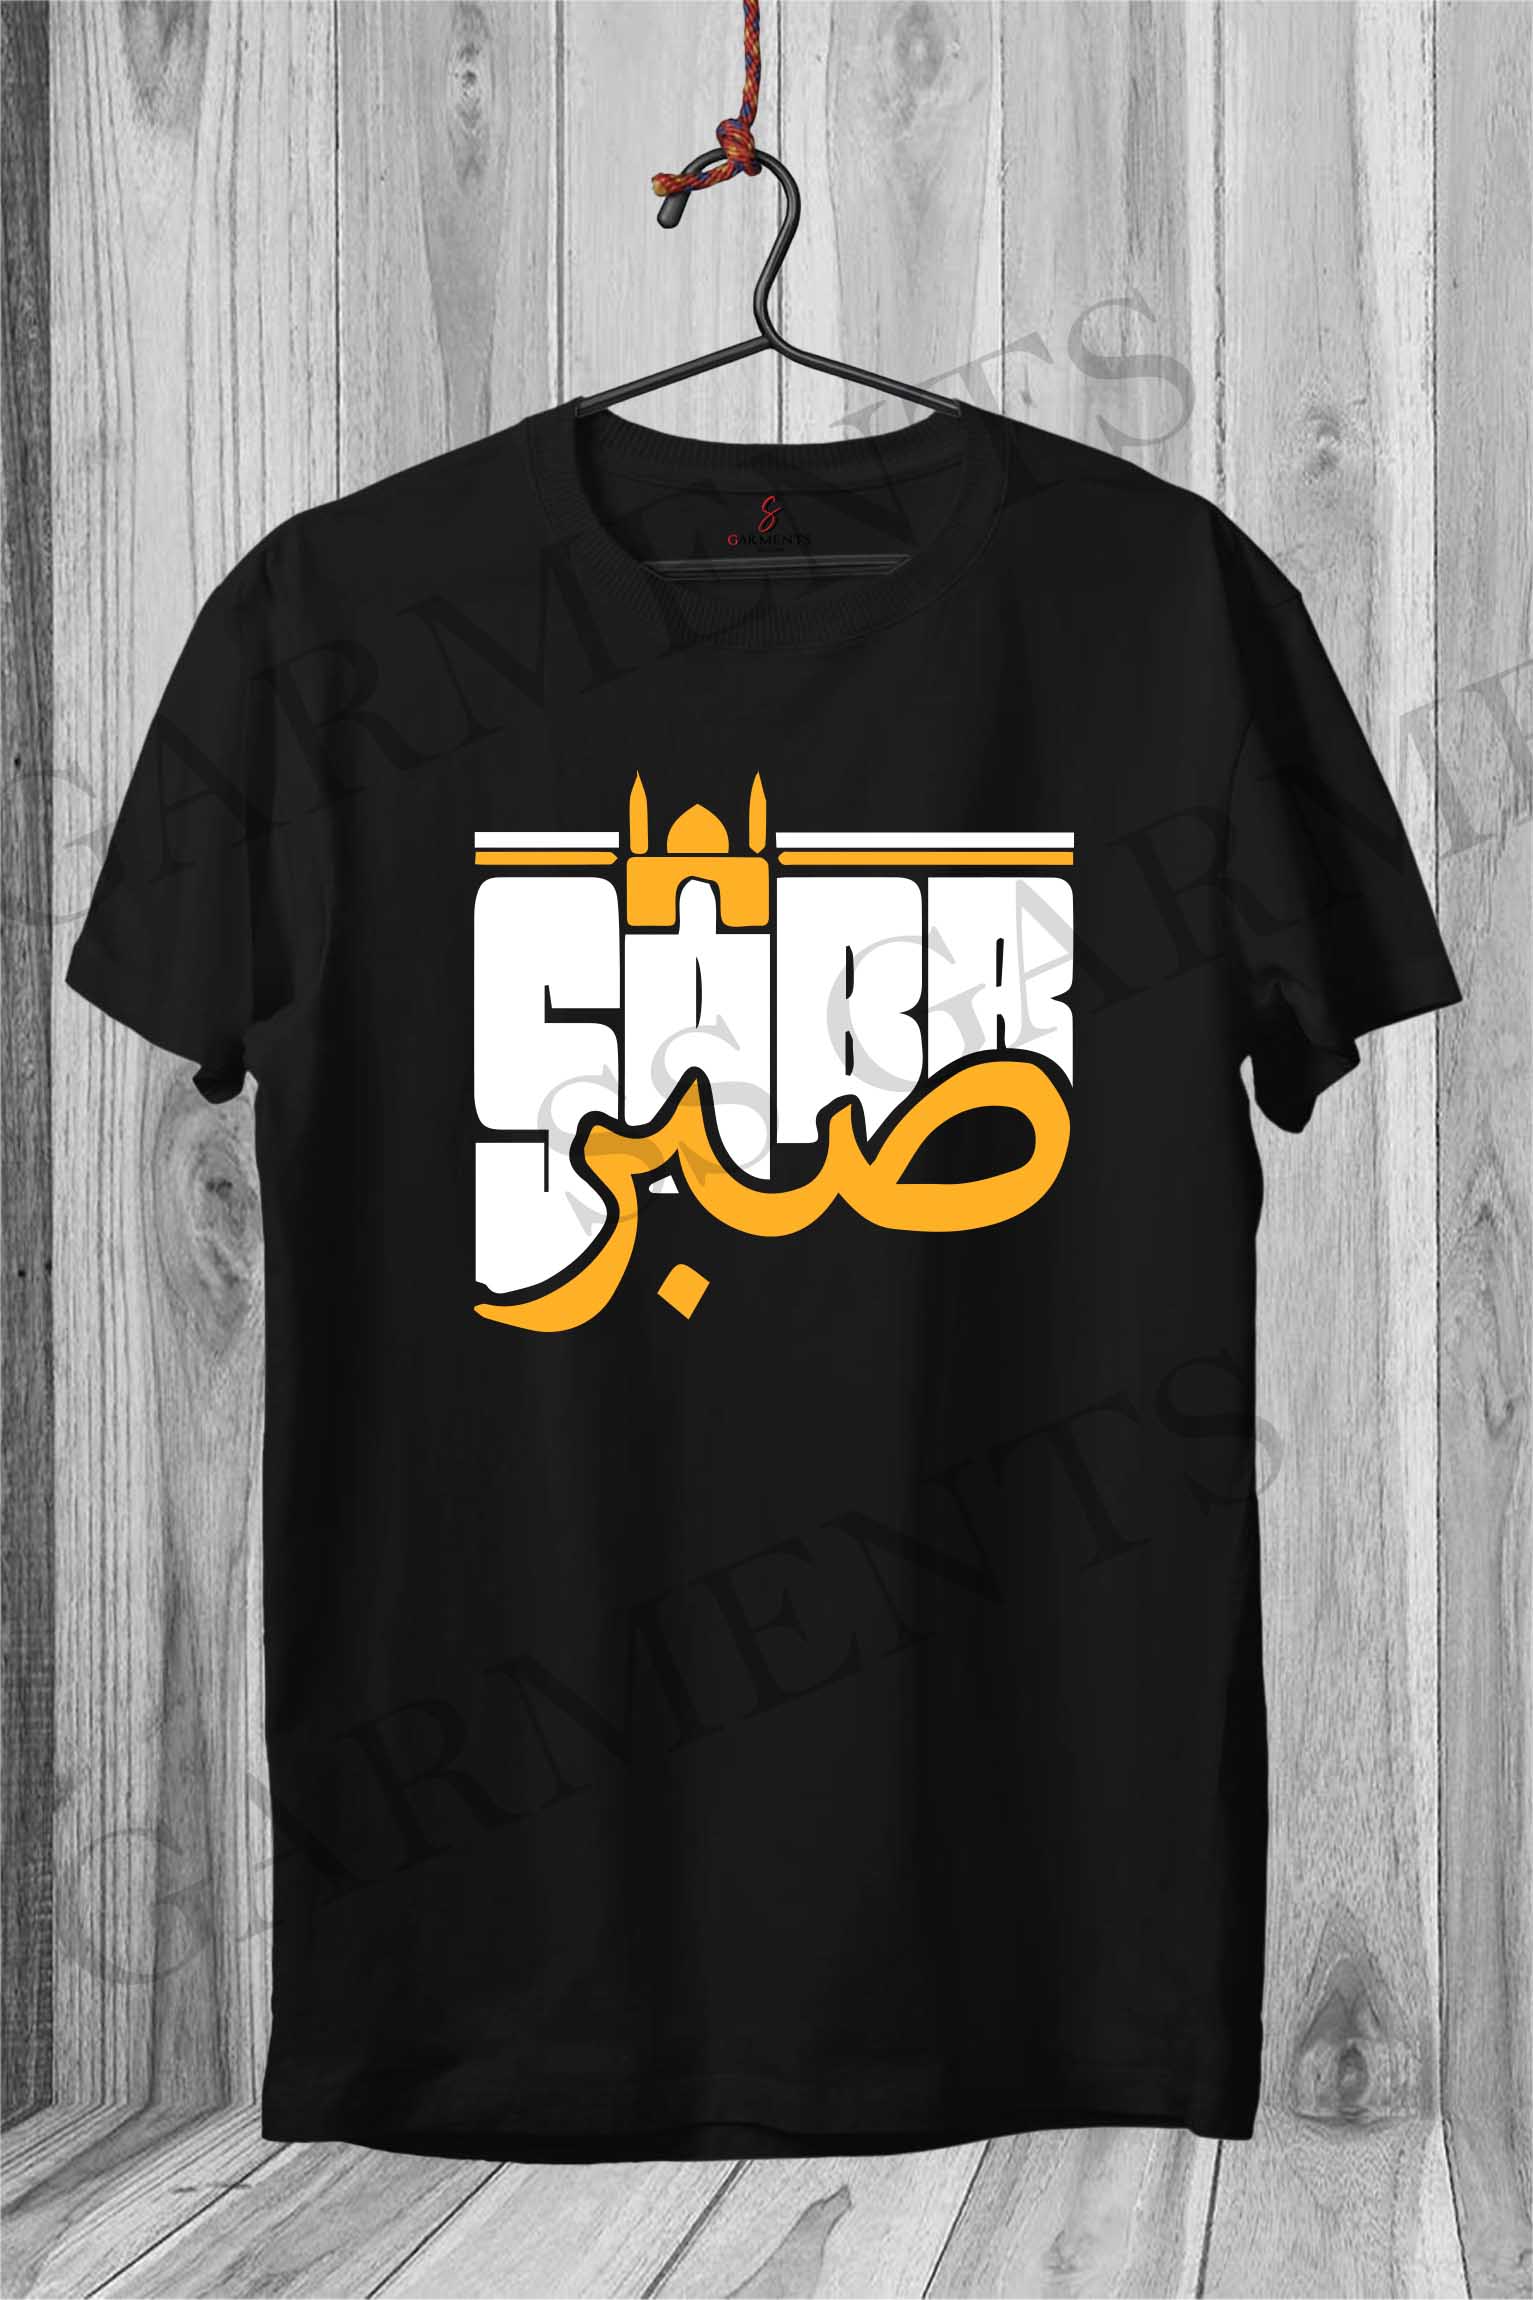 Sabr cotton t shirts for male